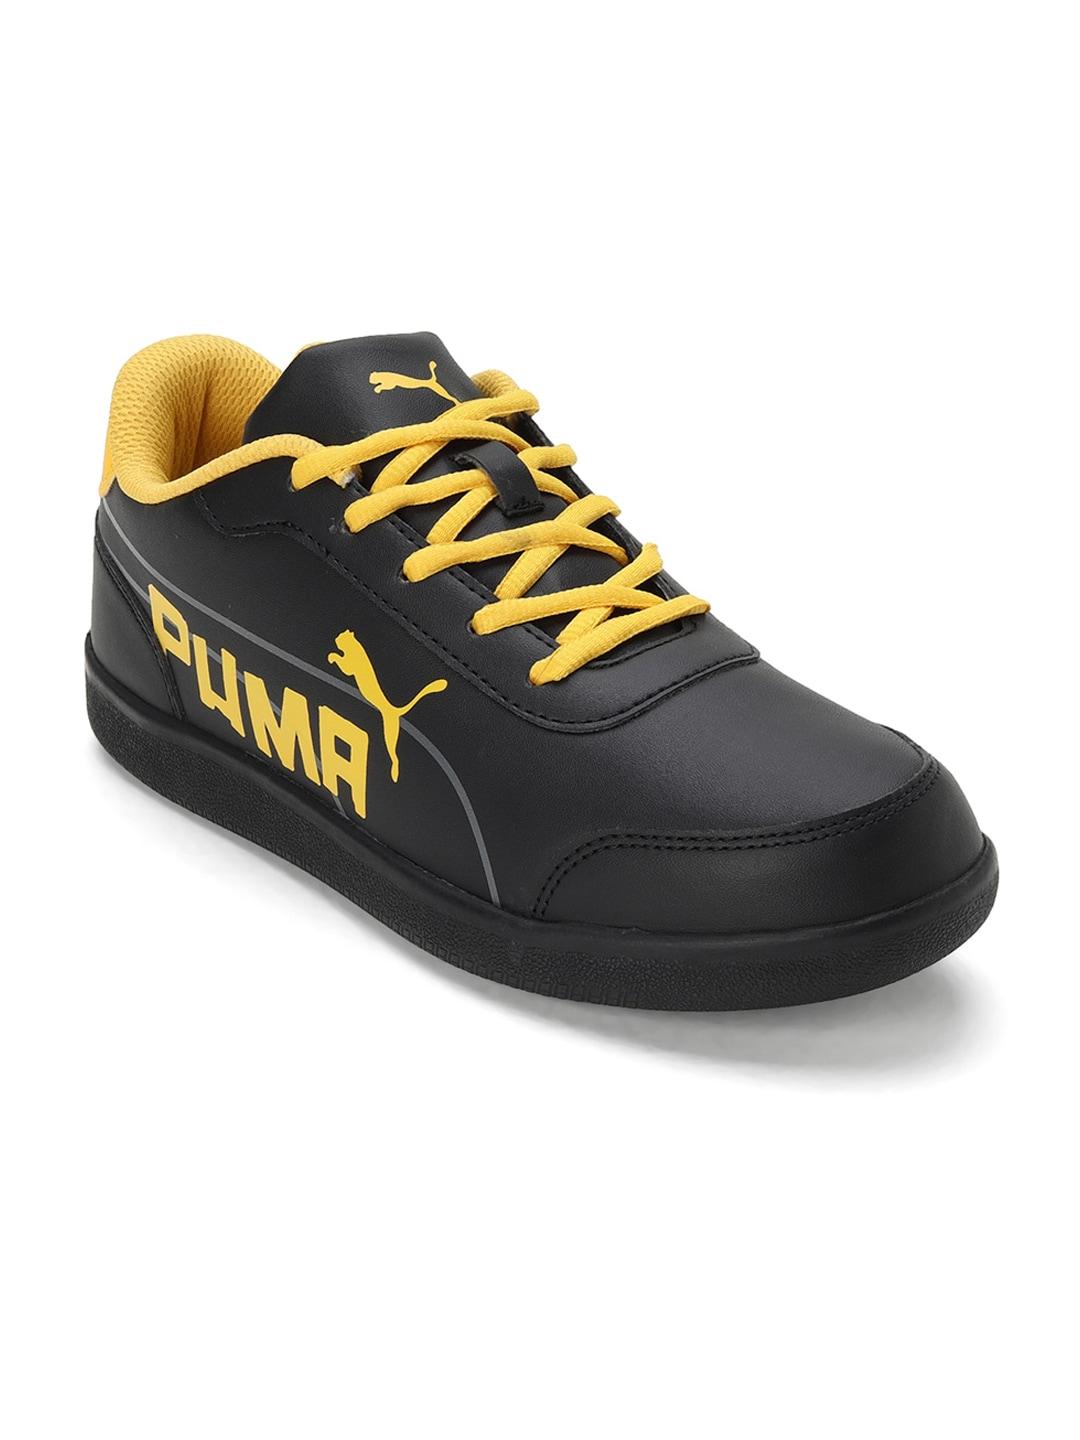 puma-boys-dreamcat-youth-sneakers